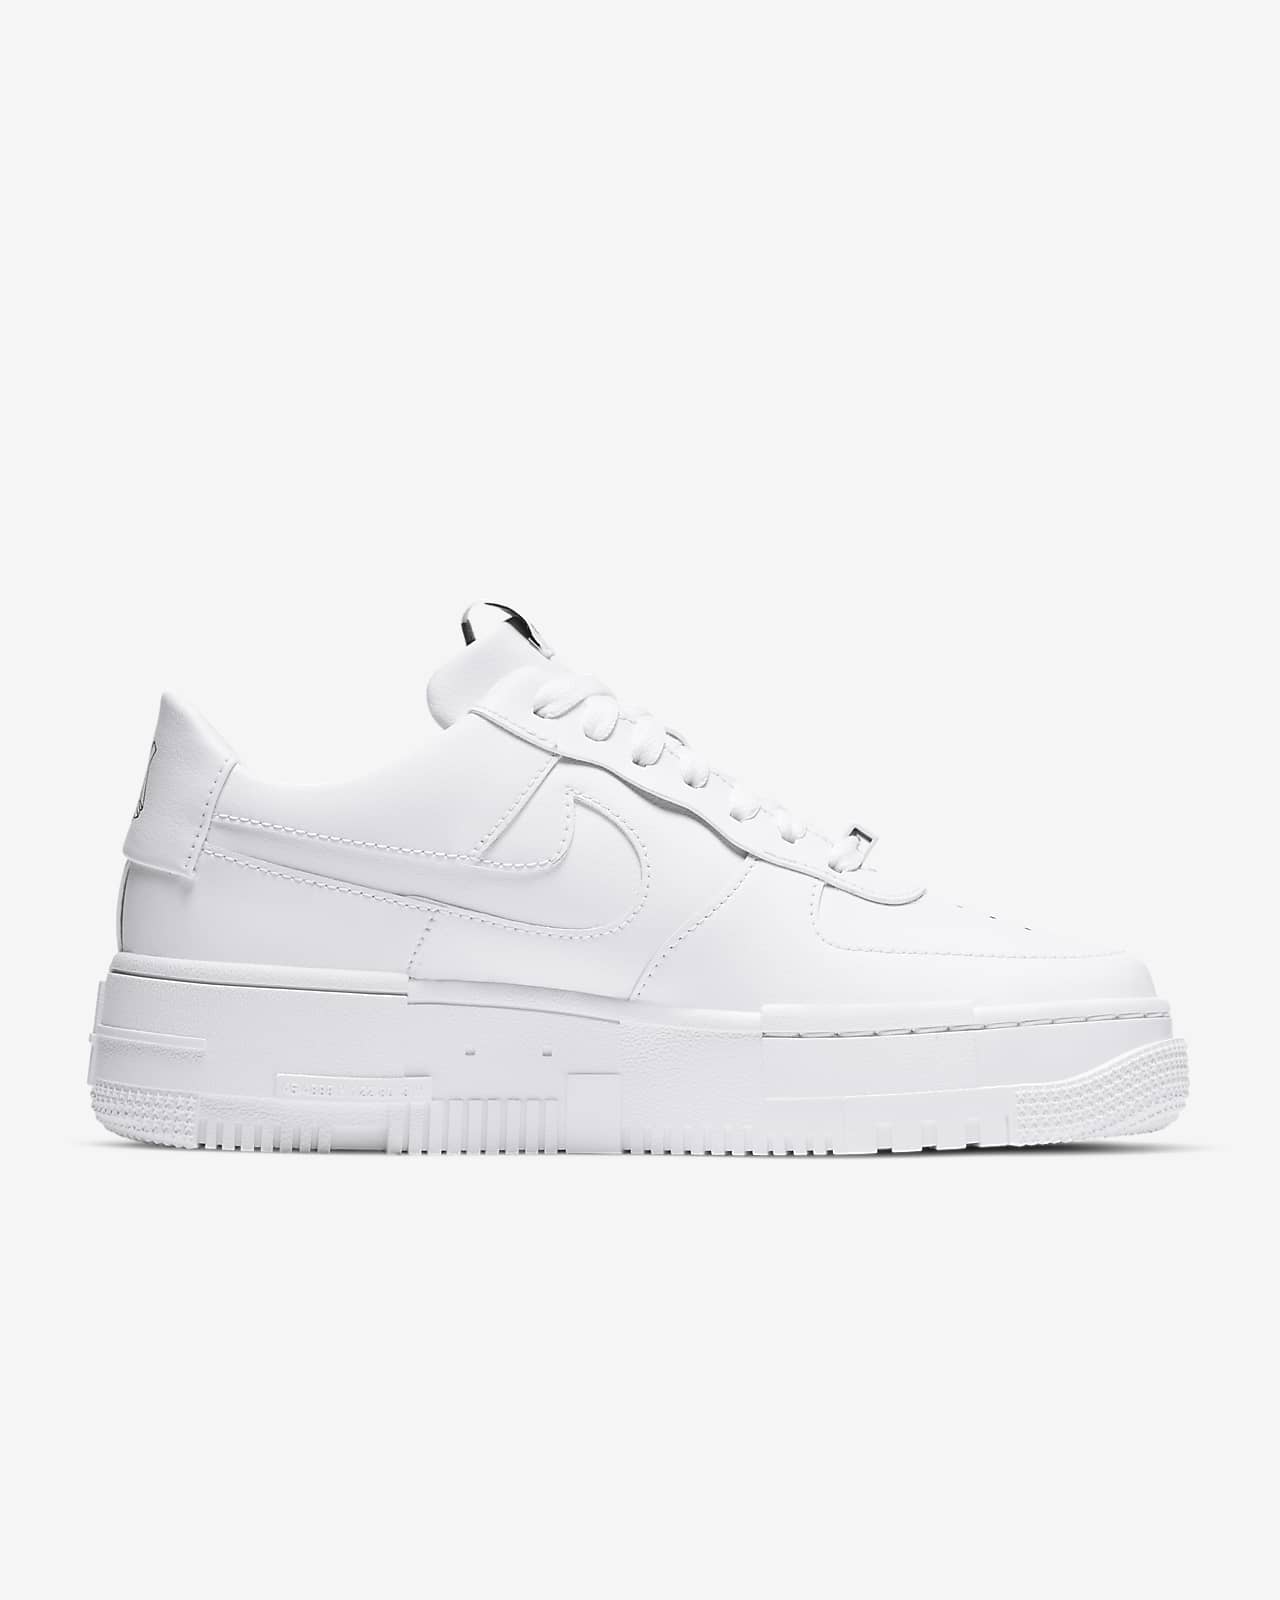 air force 1 gomma alta